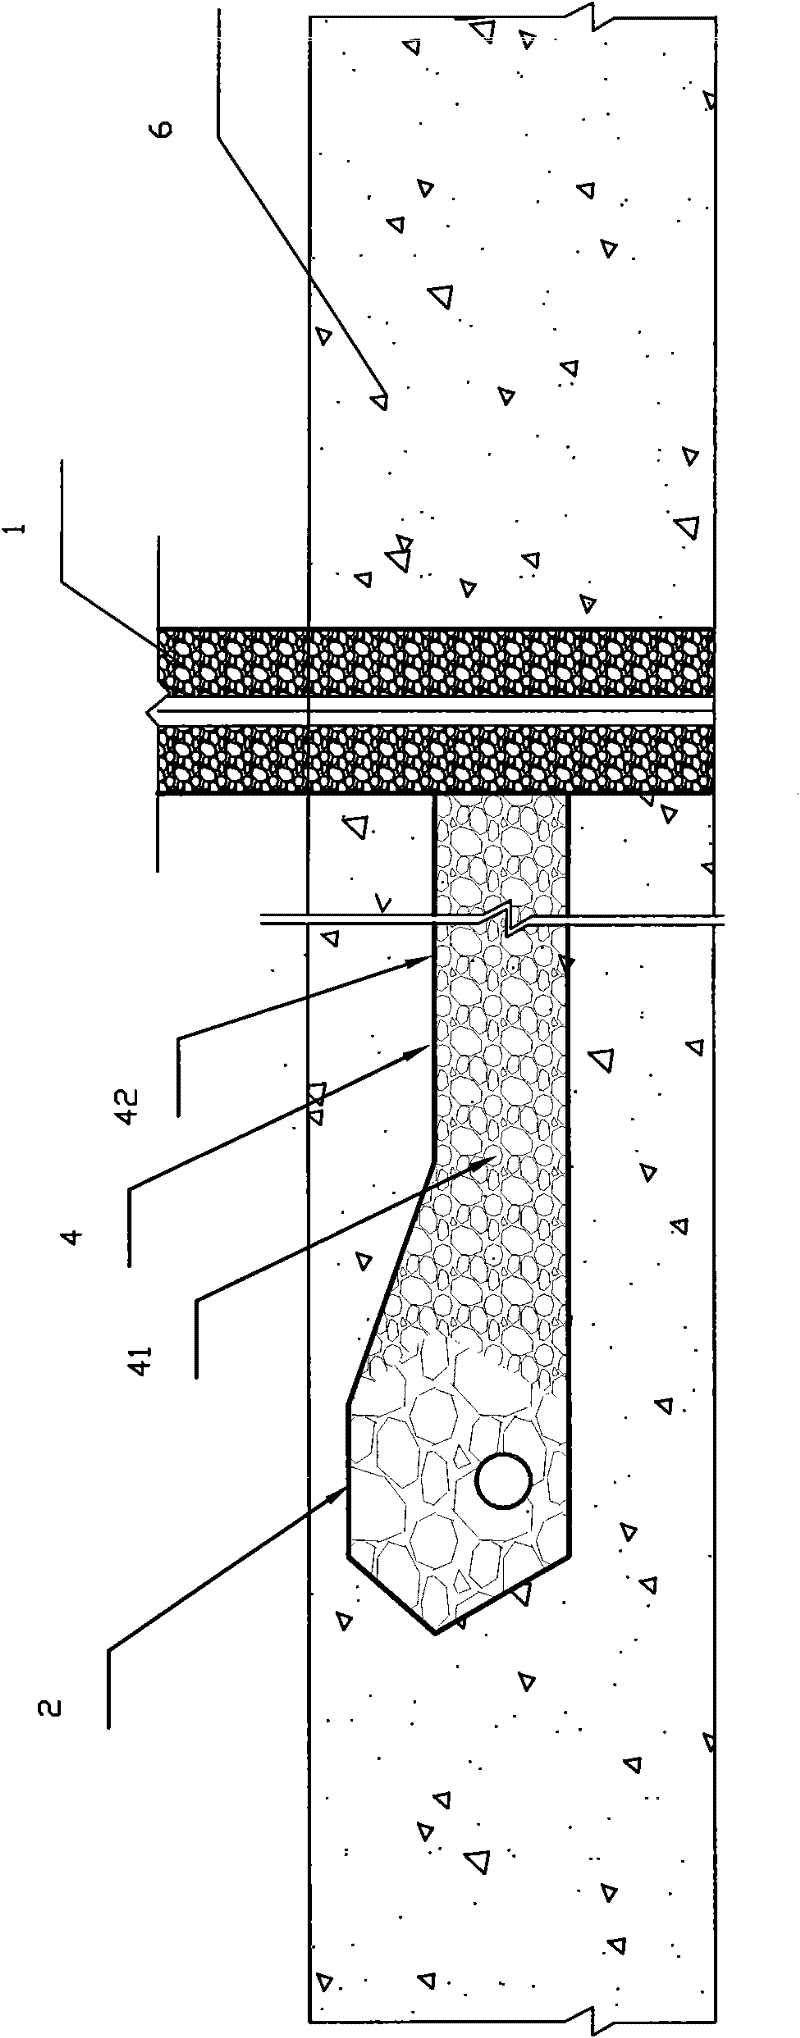 System and method for guiding discharge and collection of landfill gas